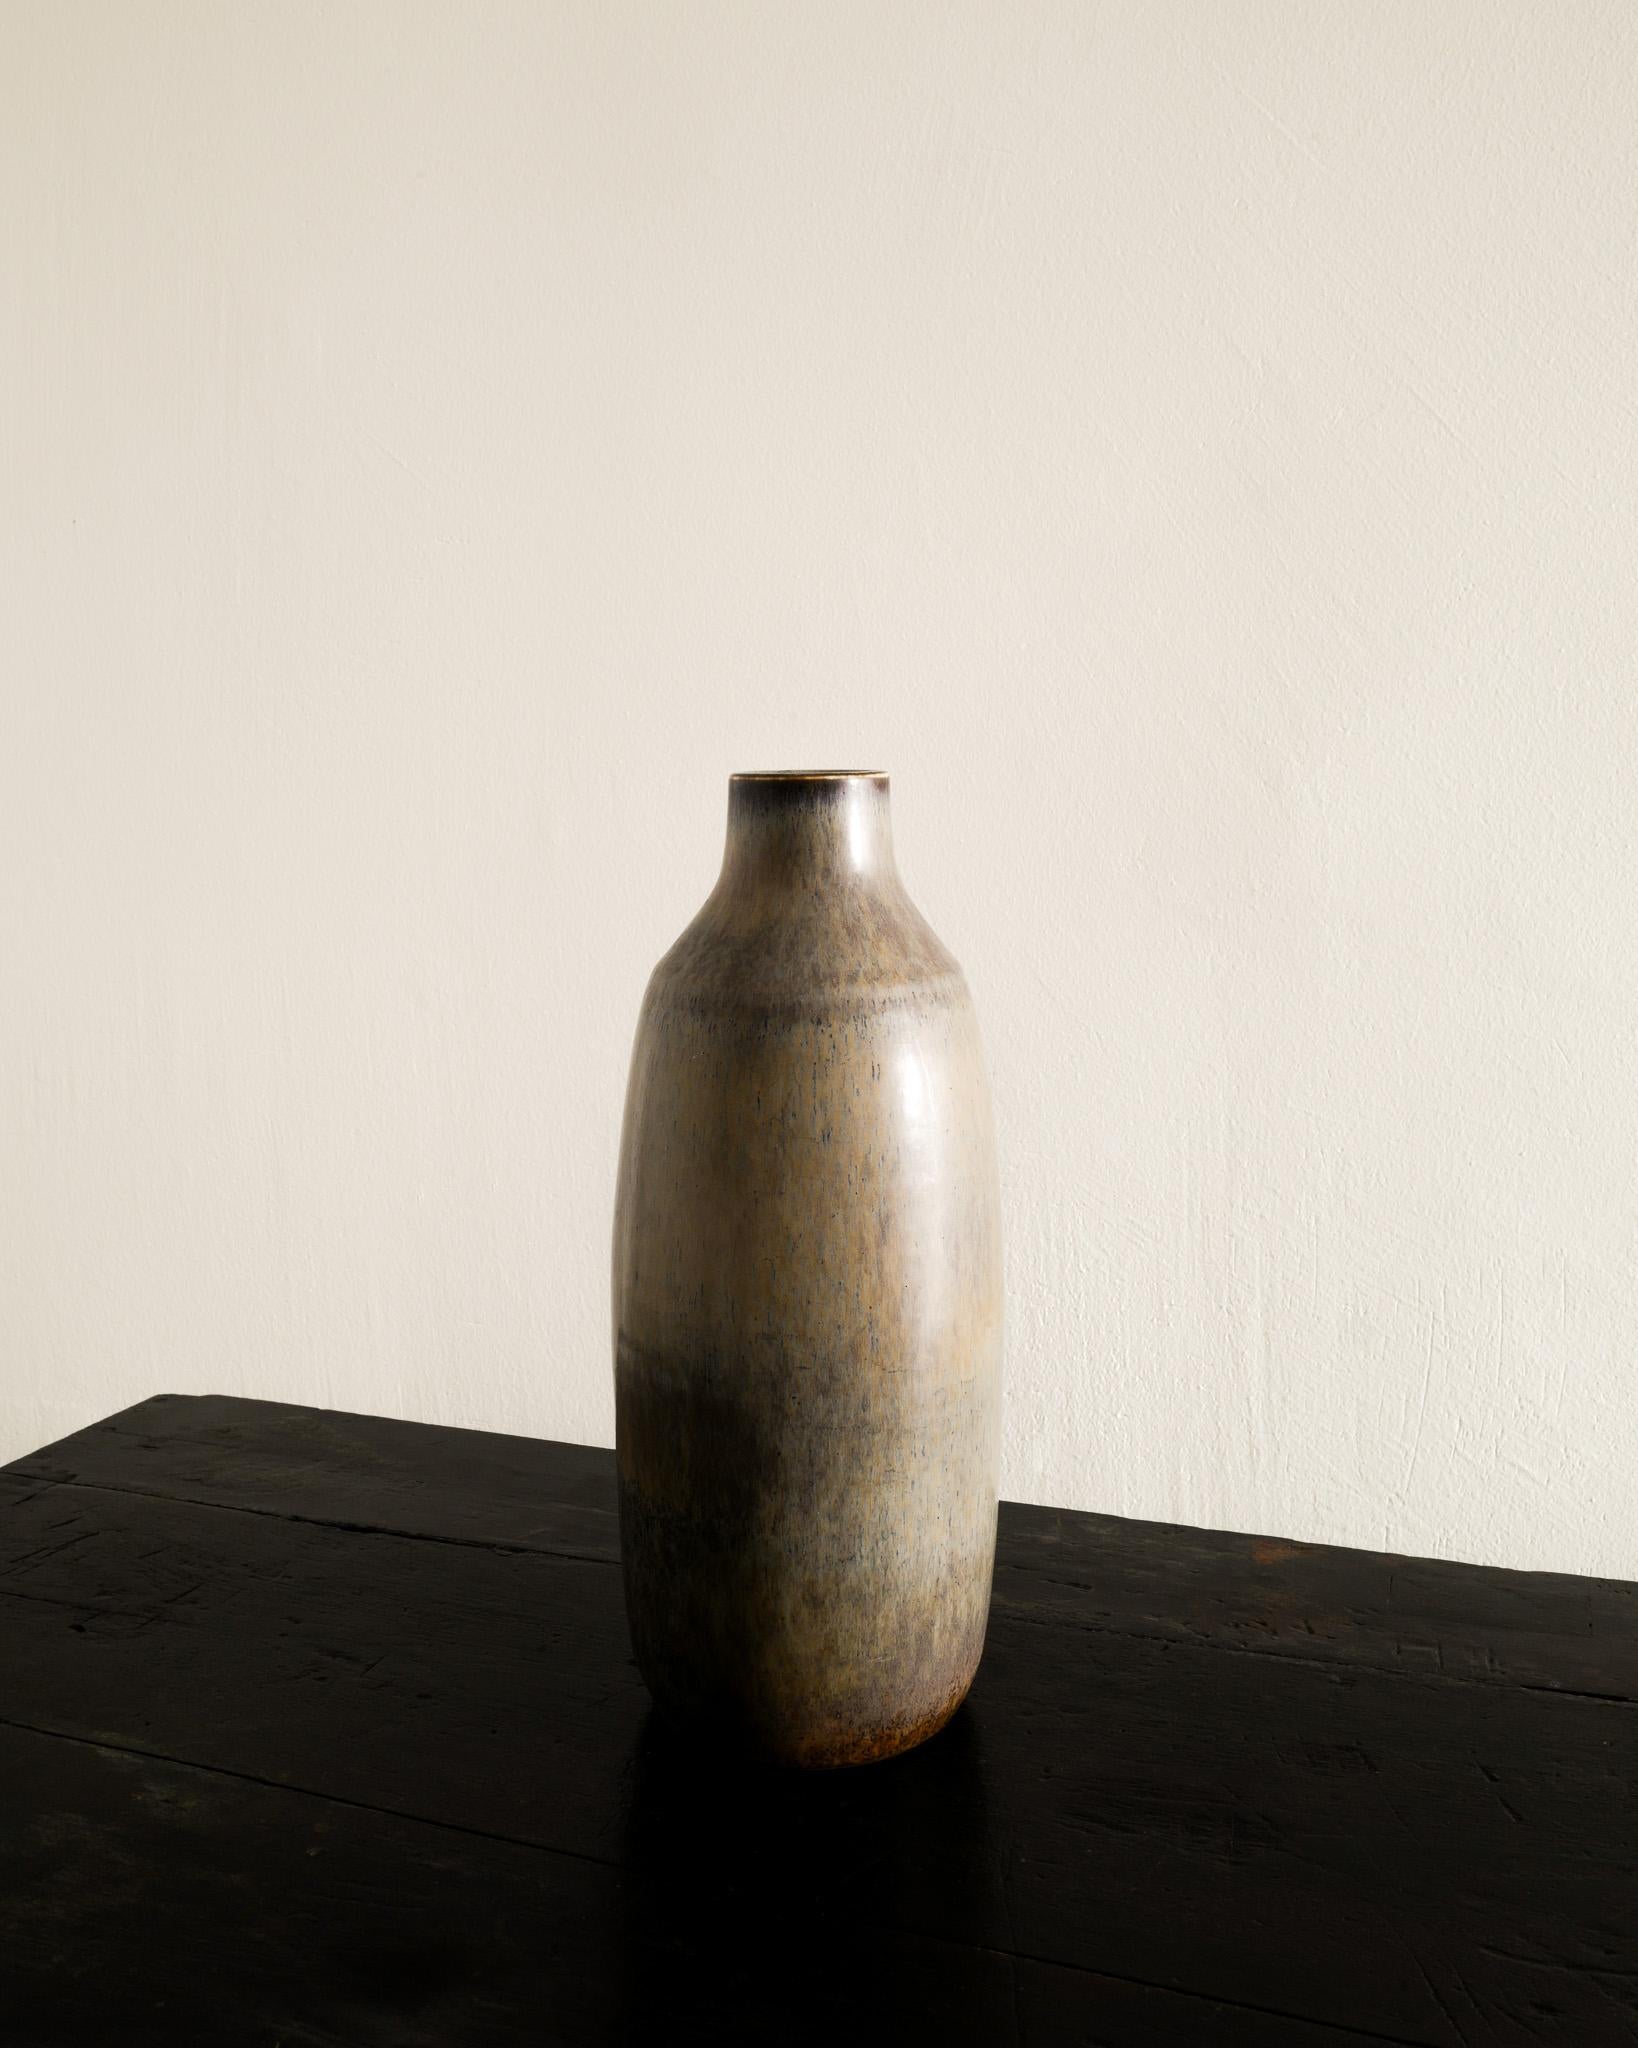 Rare mid century ceramic vase / urn by Carl-Harry Stålhane produced for Rörstrand Sweden, 1950s. In good original condition. Signed. 

Dimensions: H: 34 cm / 13.40